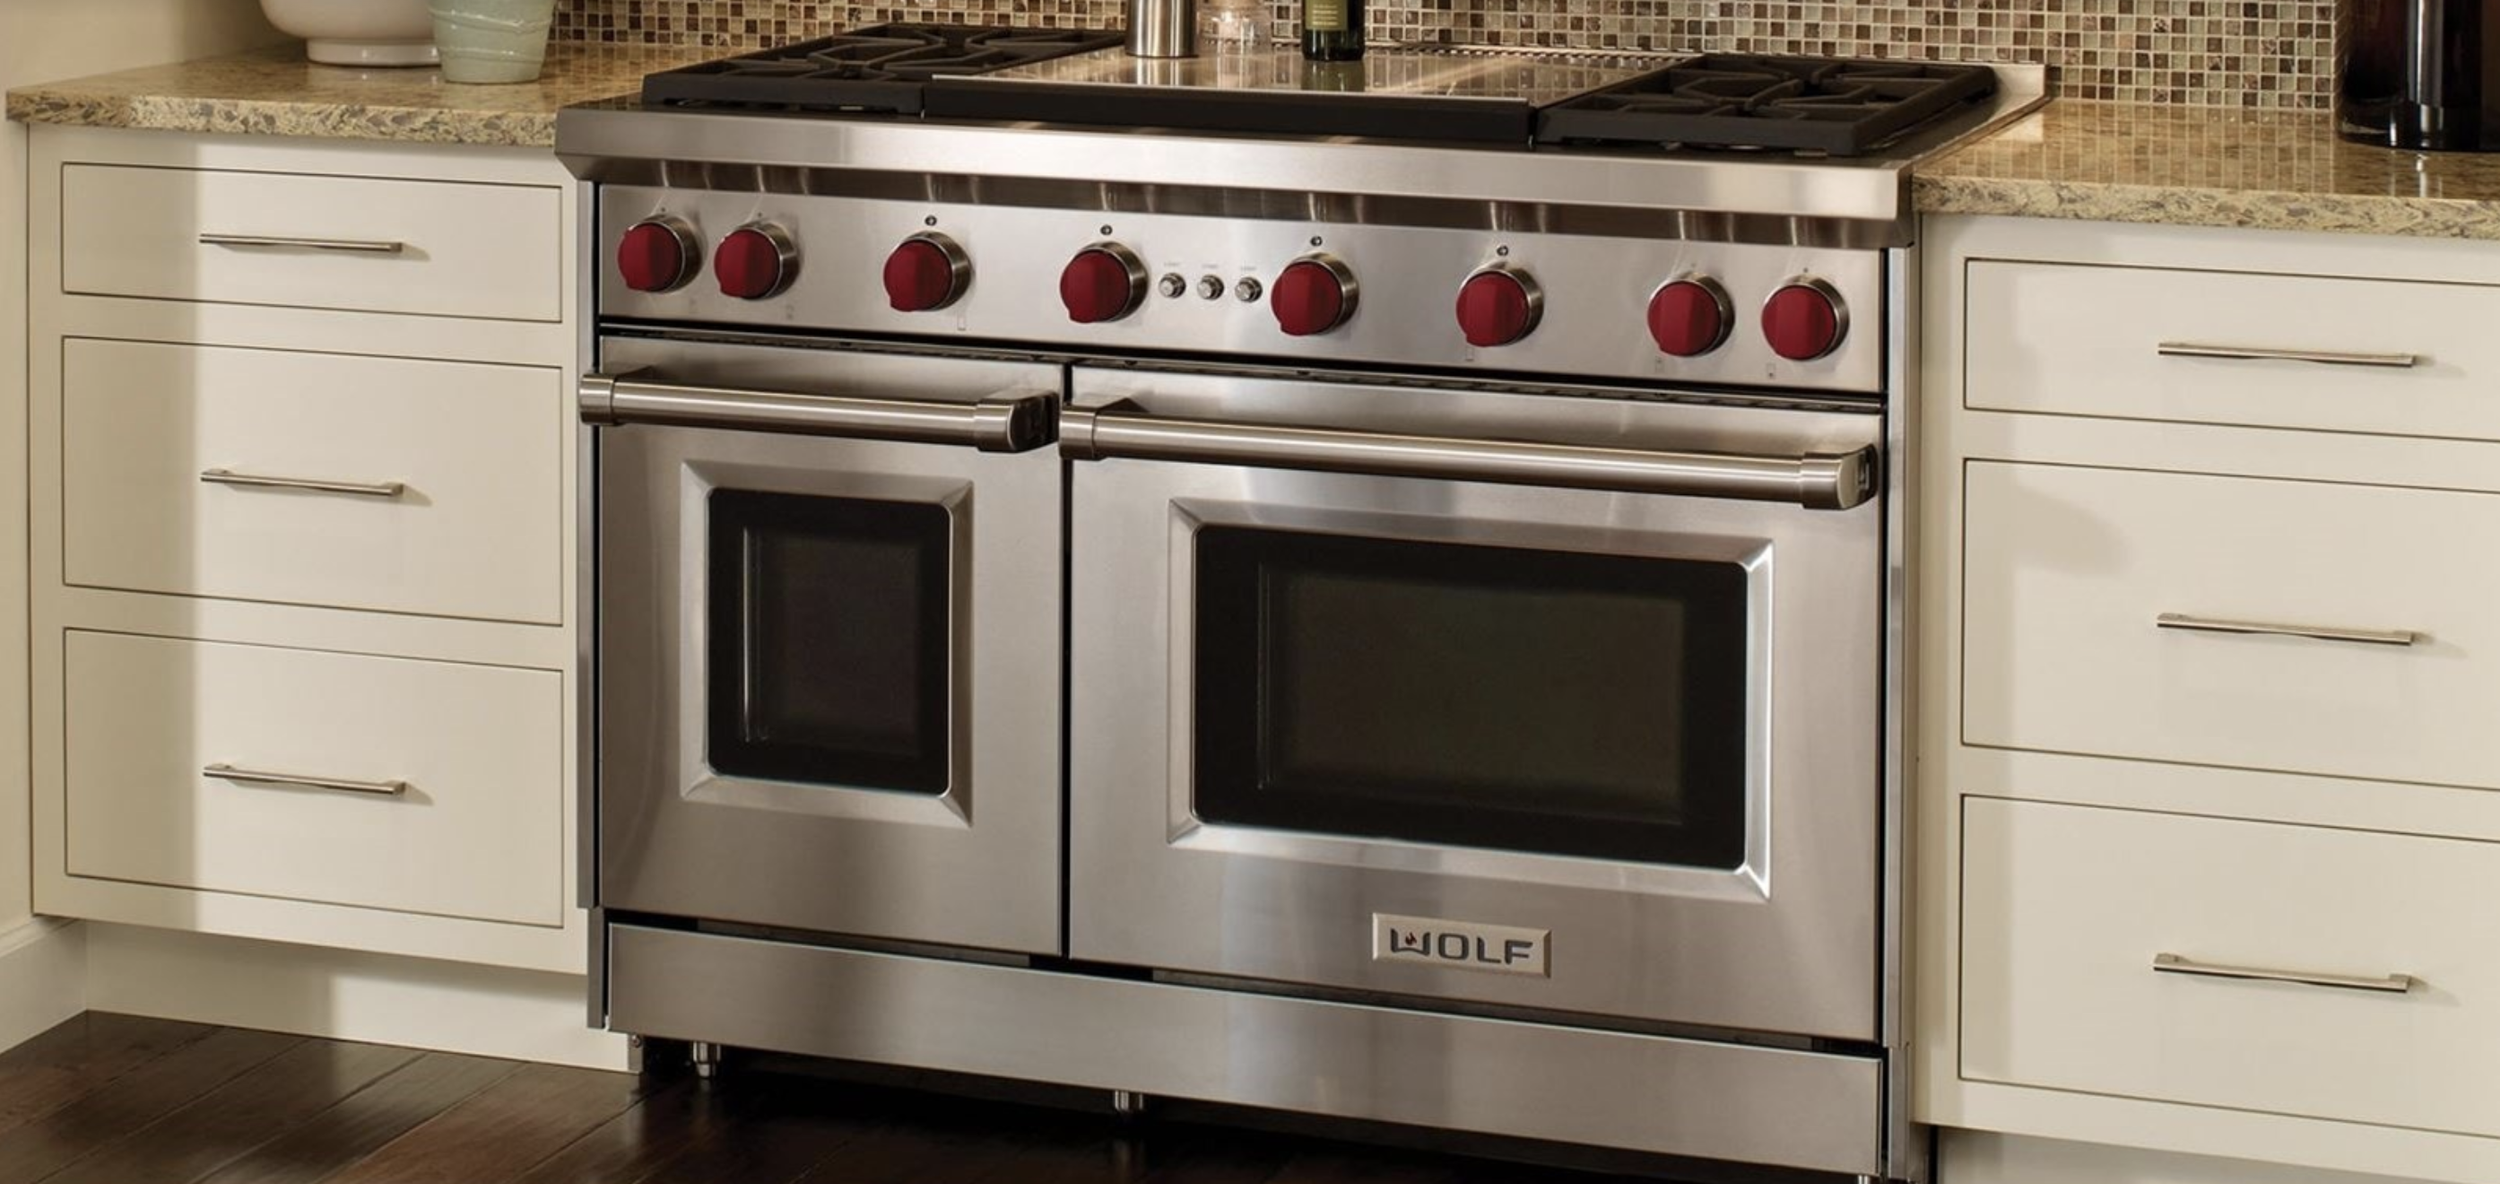 48 Gas Range - 6 Burners and Infrared Griddle Wolf Rangetop